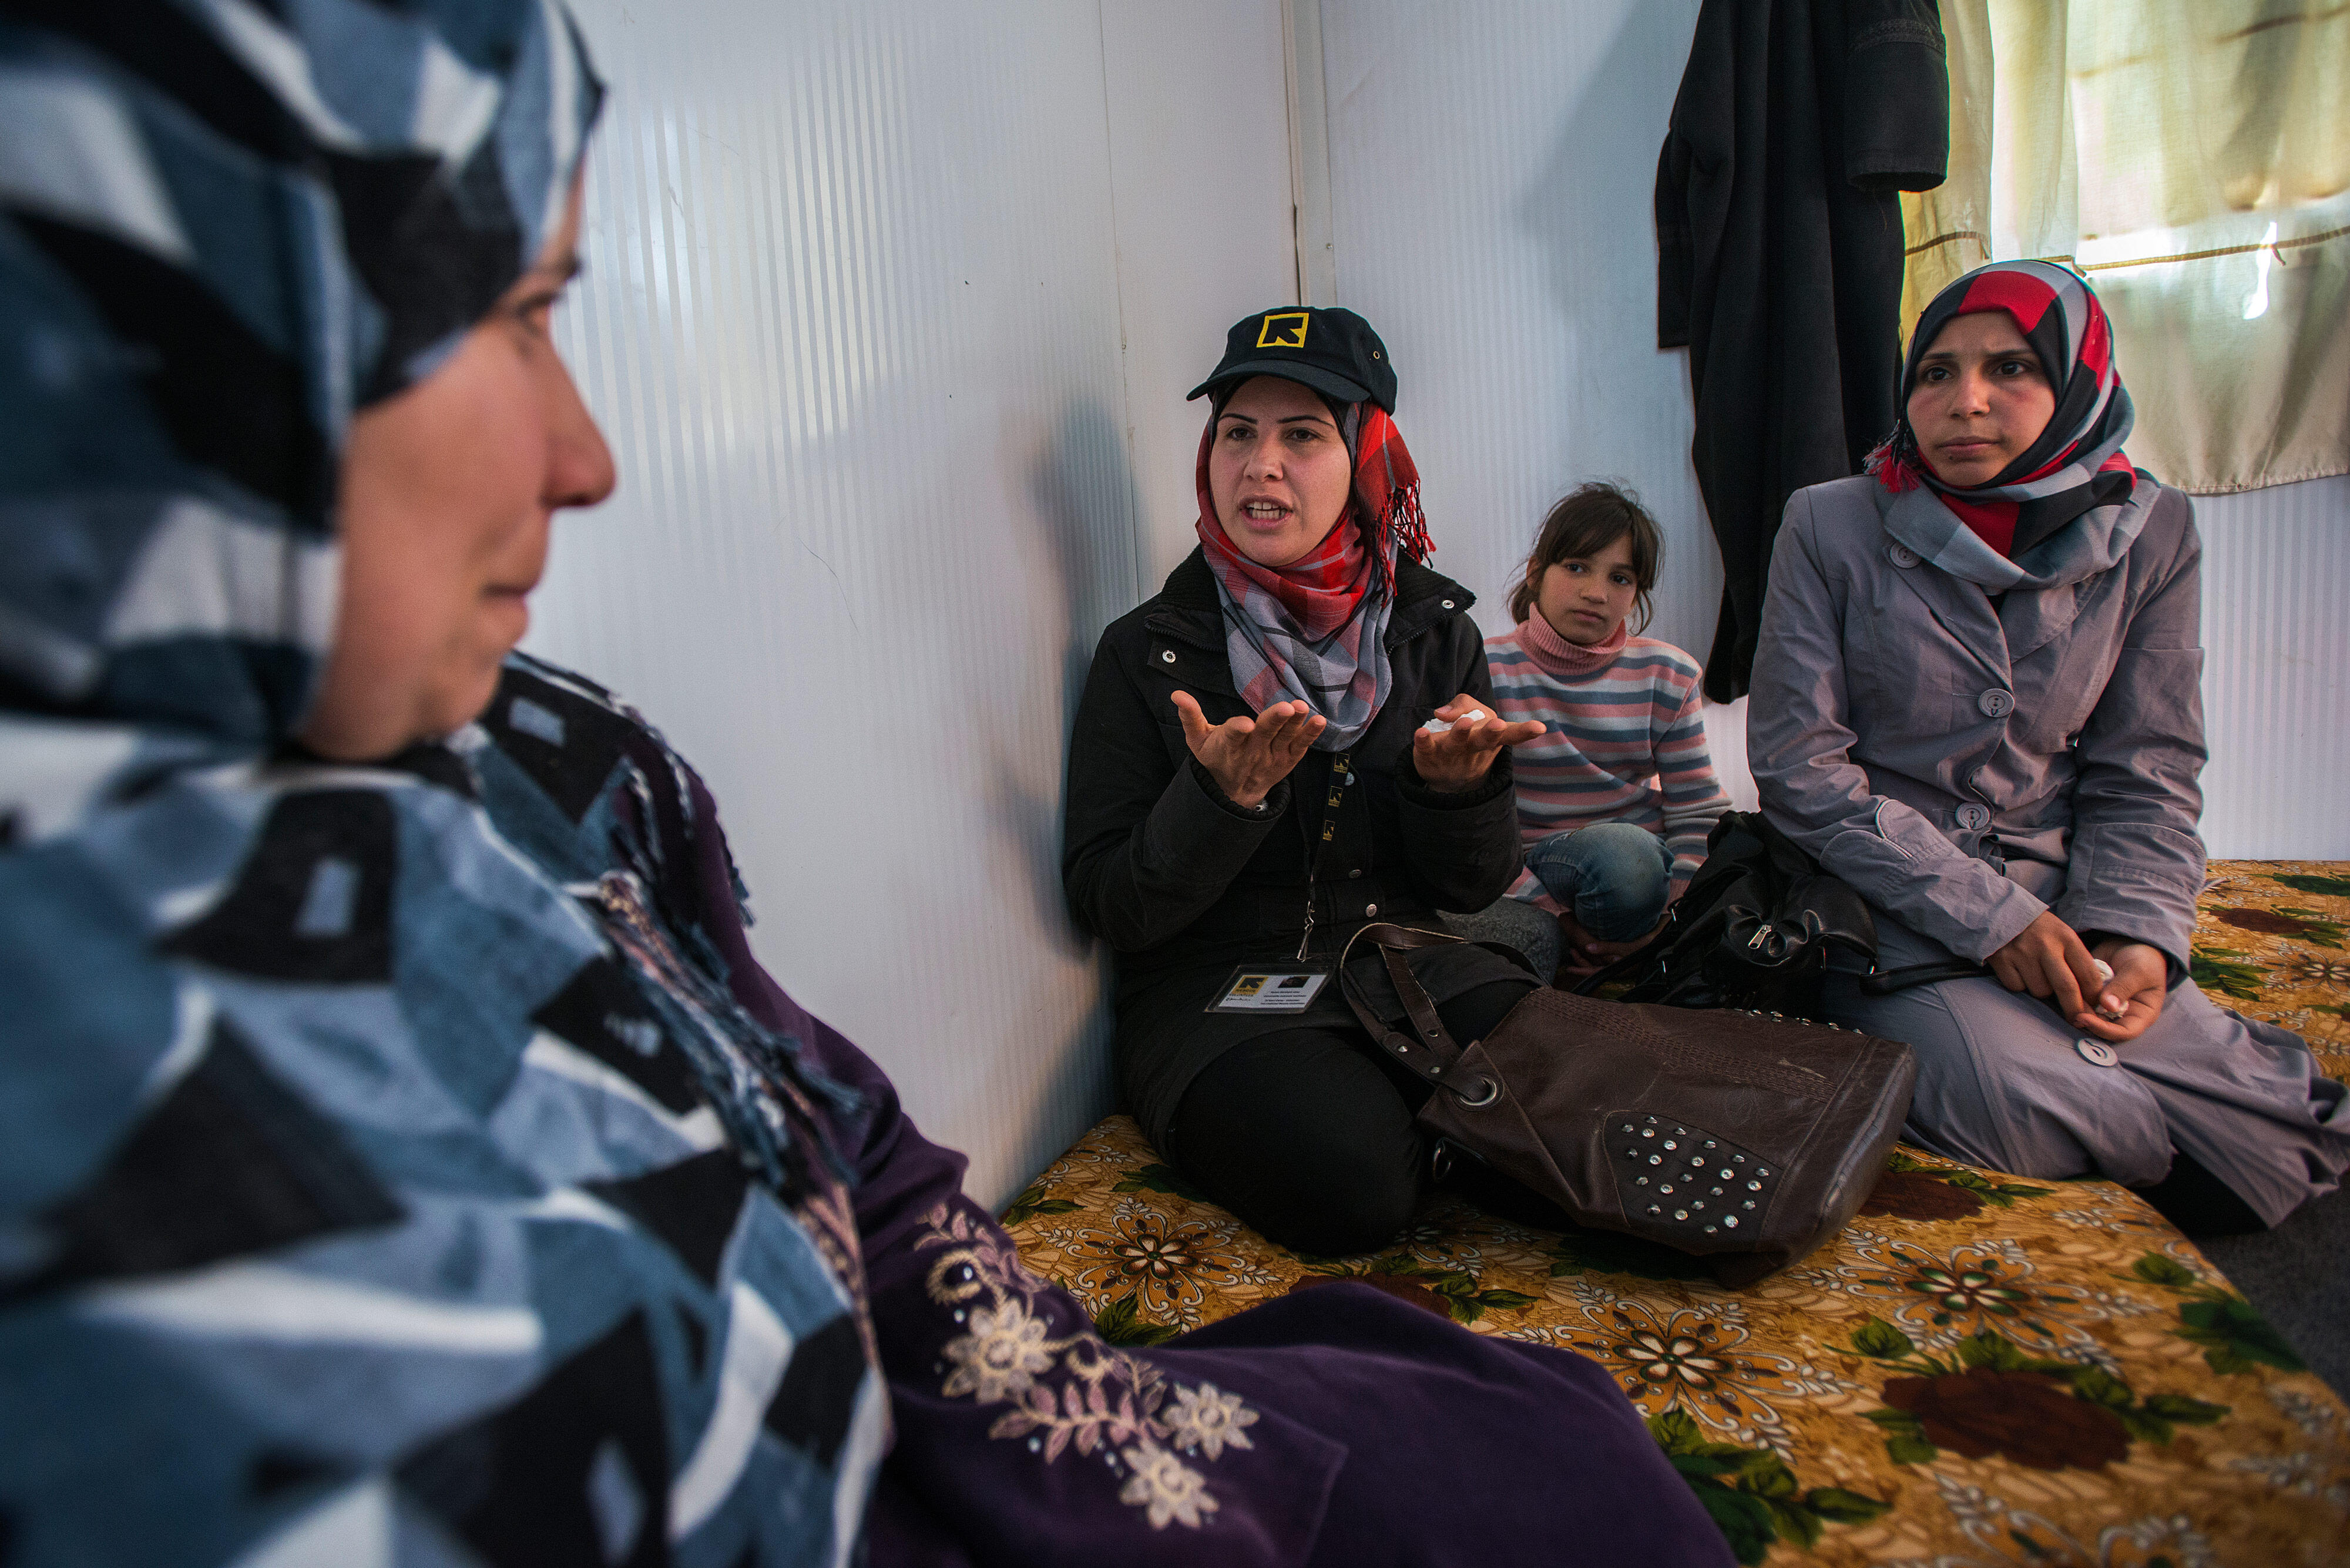 An IRC staff member talks with a Syrian refugee family seated on cushions in their shelter in Zaatari refugee camp in Jordan.